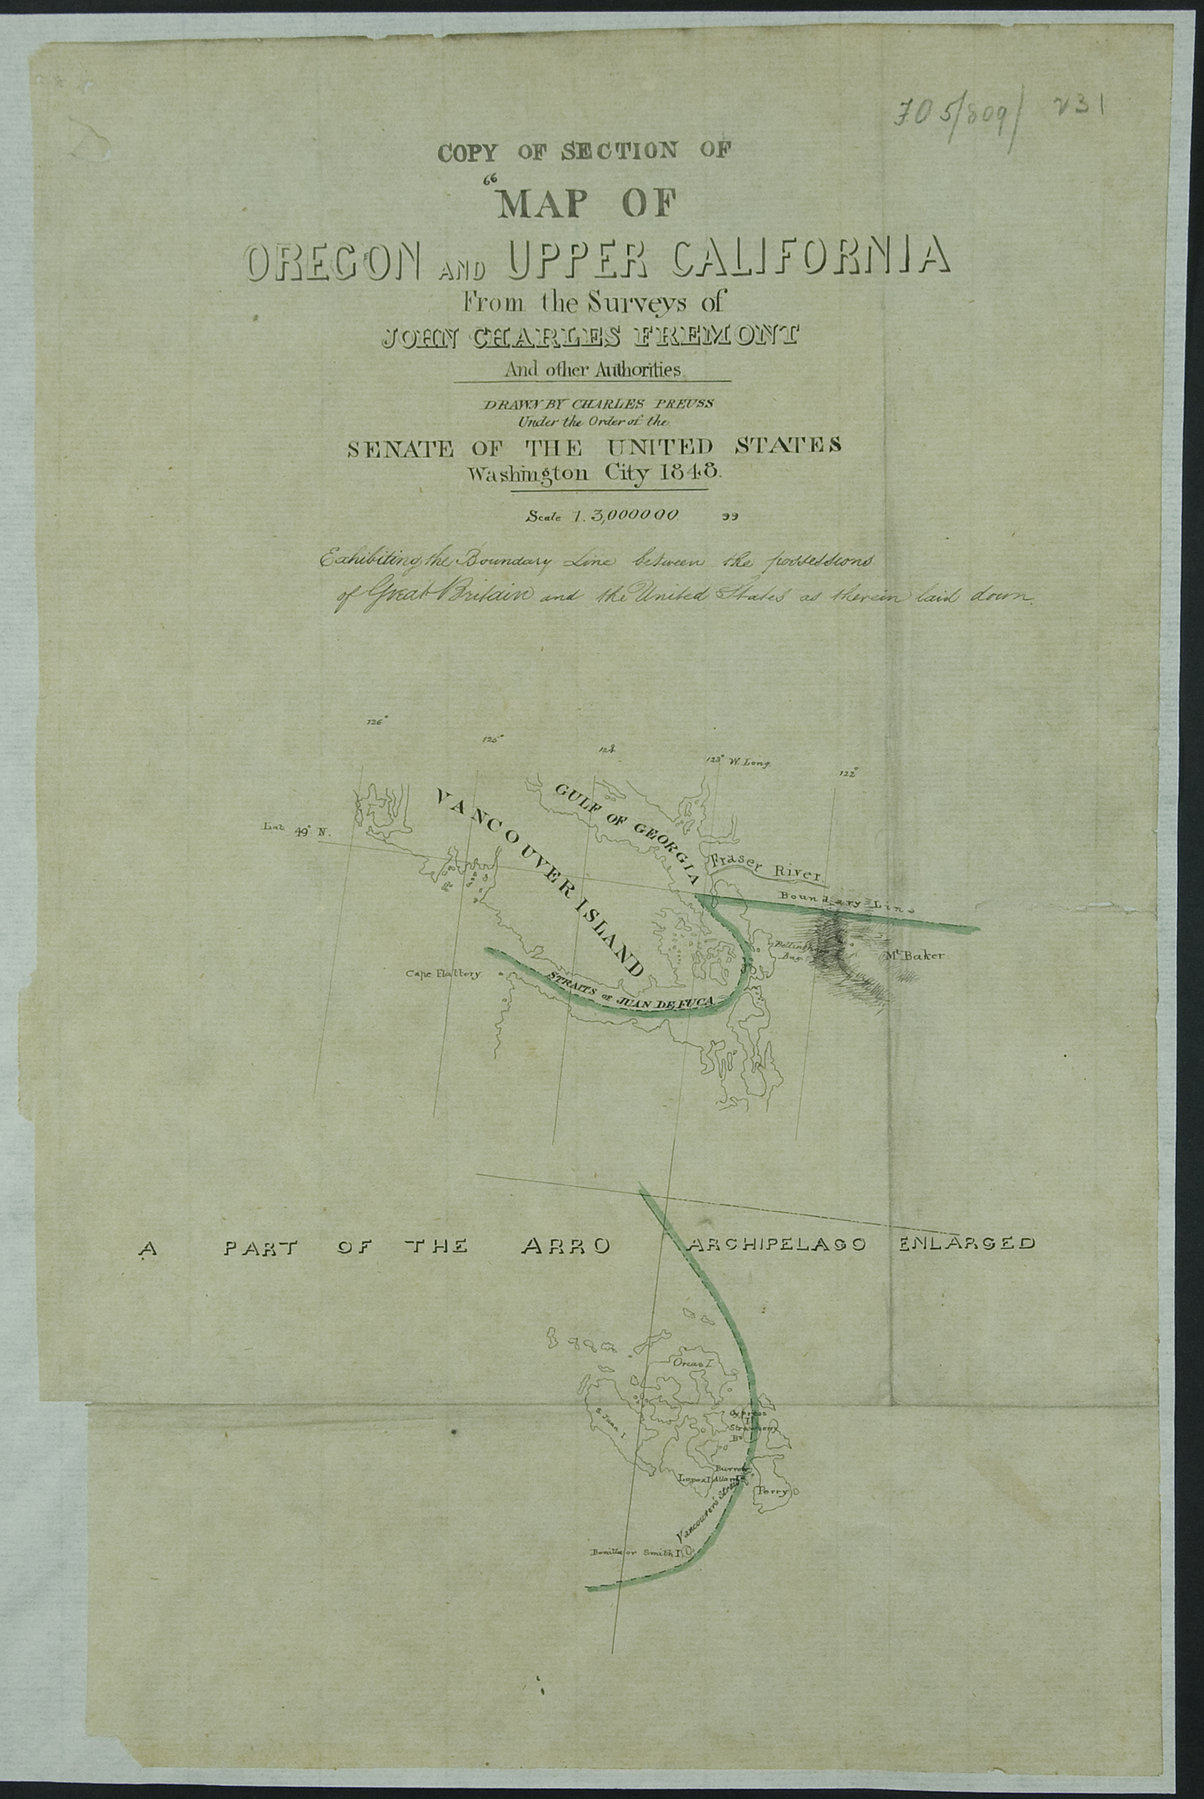 Copy of Section of ""Map of Oregon and Upper California From the Surveys of John Charles Fremont and other Authorities. 